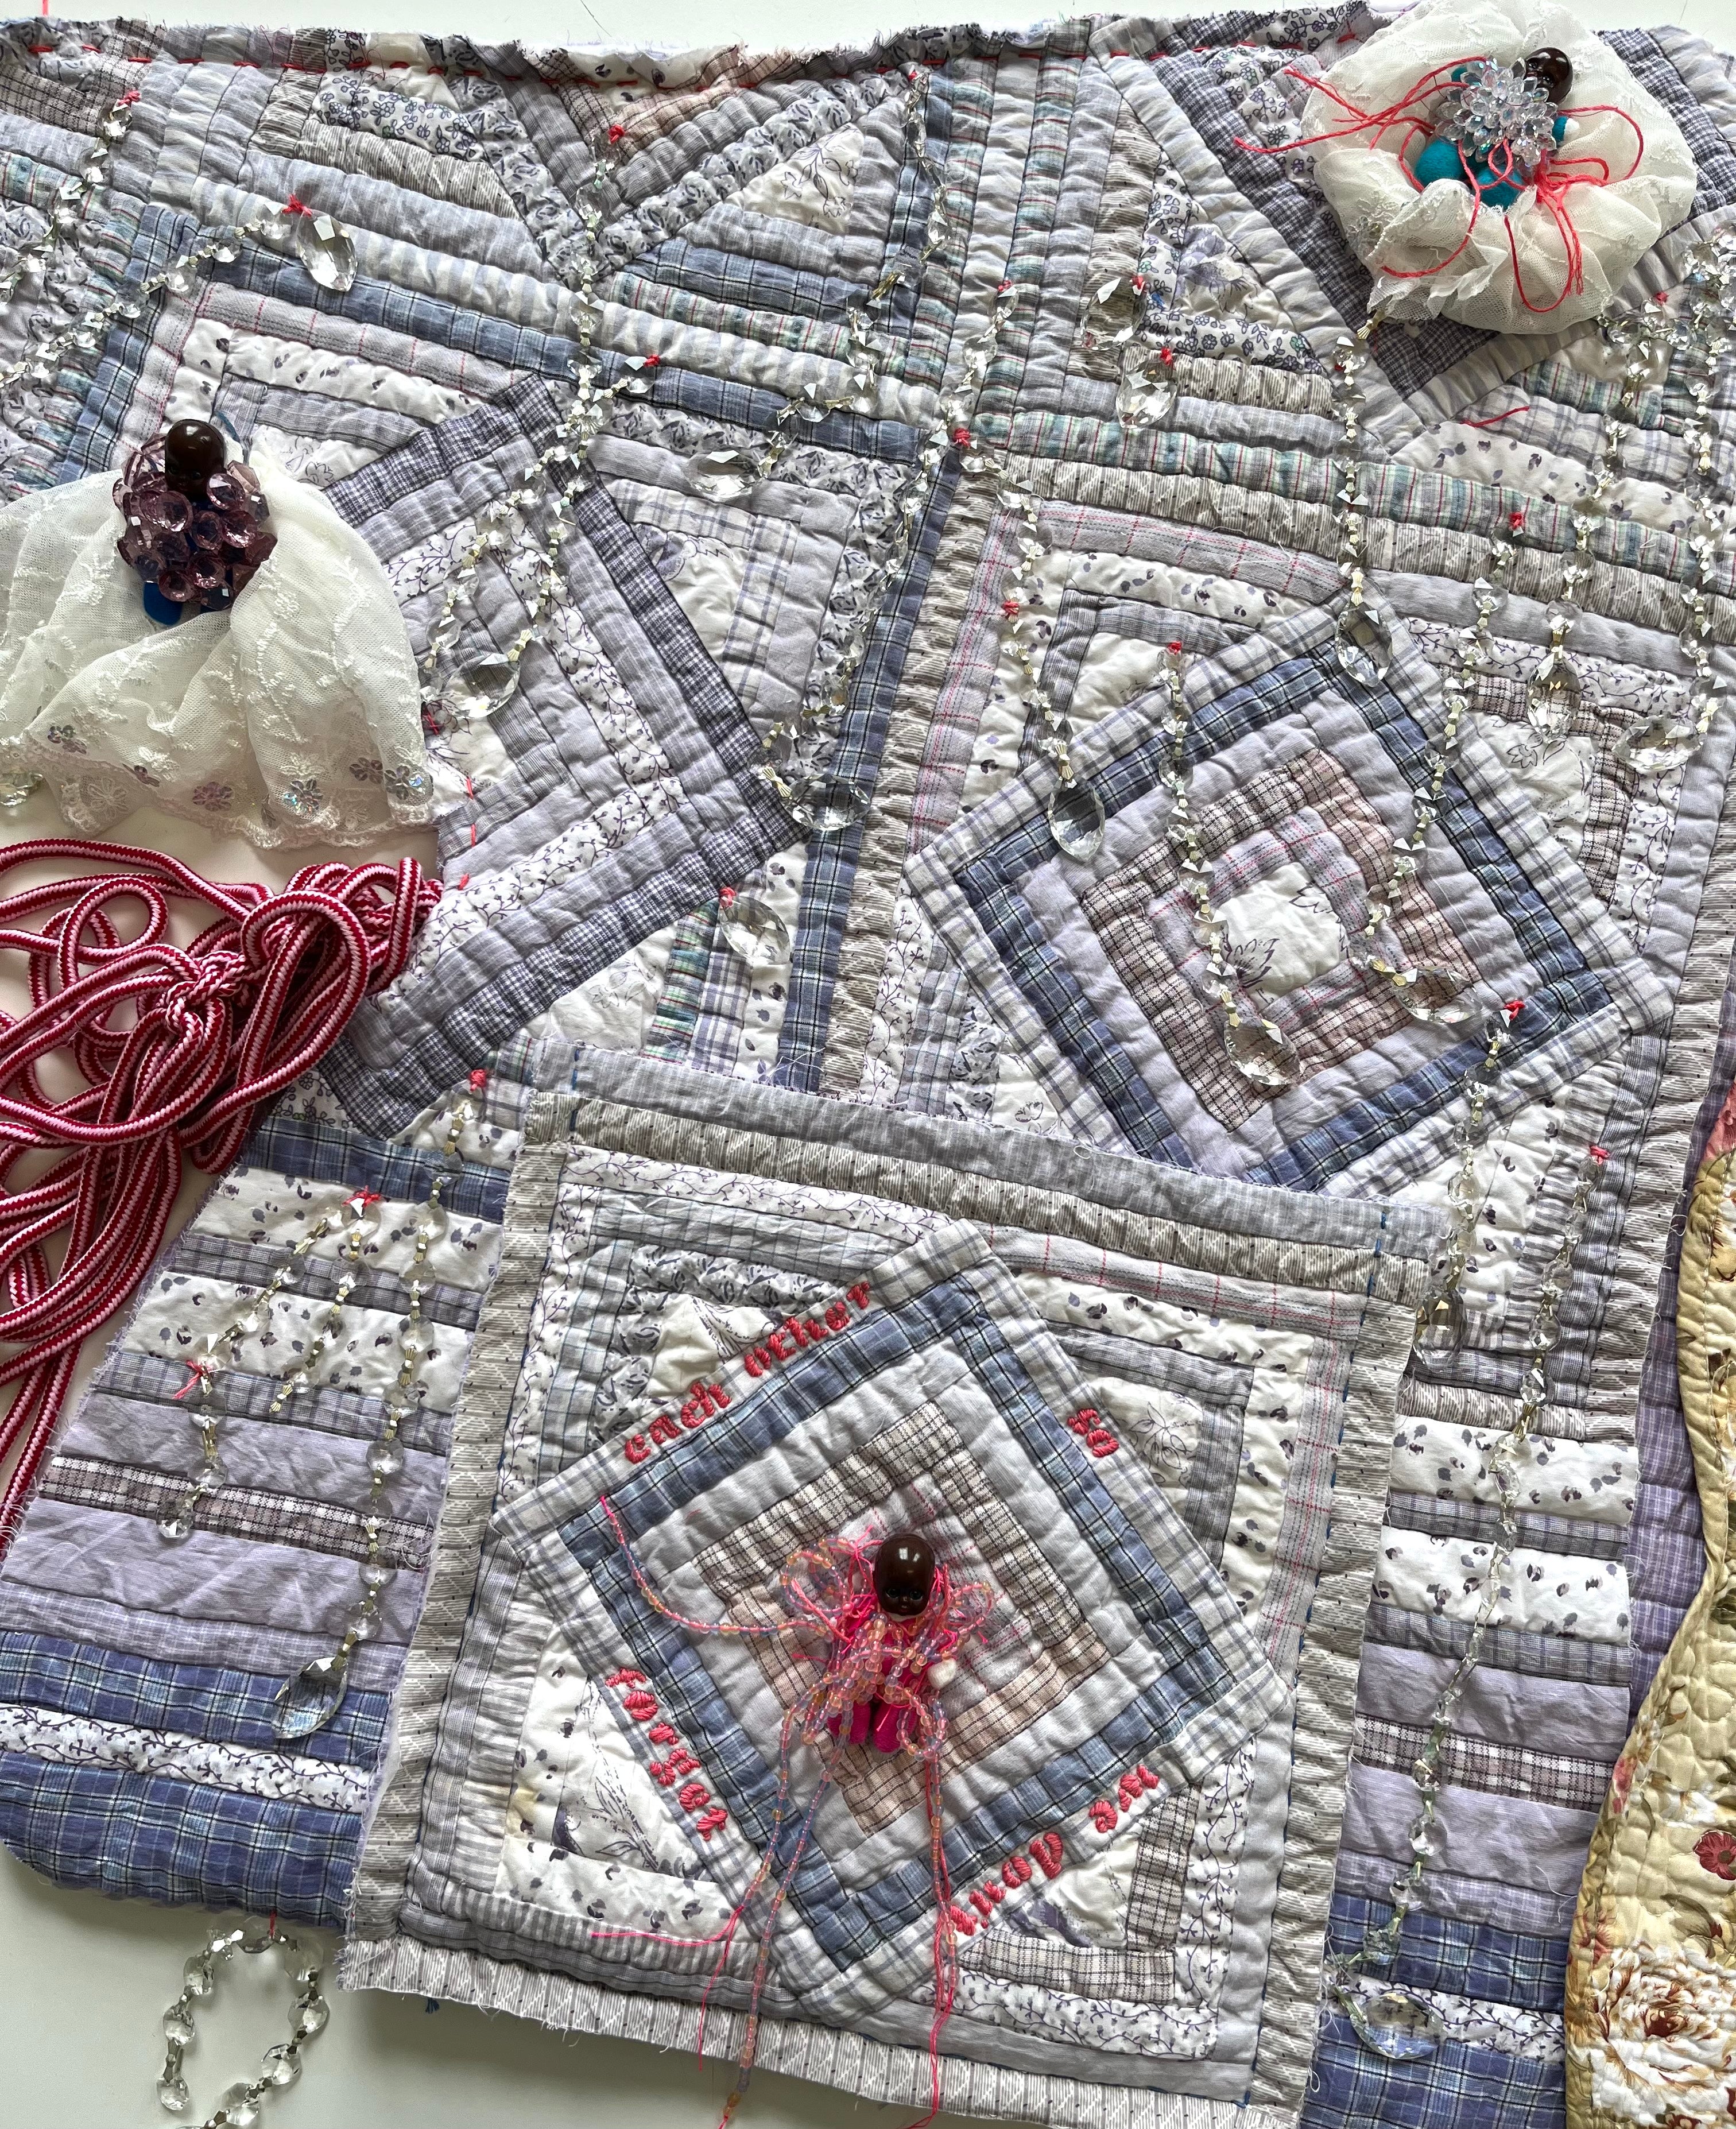 Quilted artwork by Dr. Sequoia Barnes entitled So We Don’t Forget Each Other, Phase 1 (2022), ‘coat’ made of recycled quilts, fabric remnants, rope, and found objects.